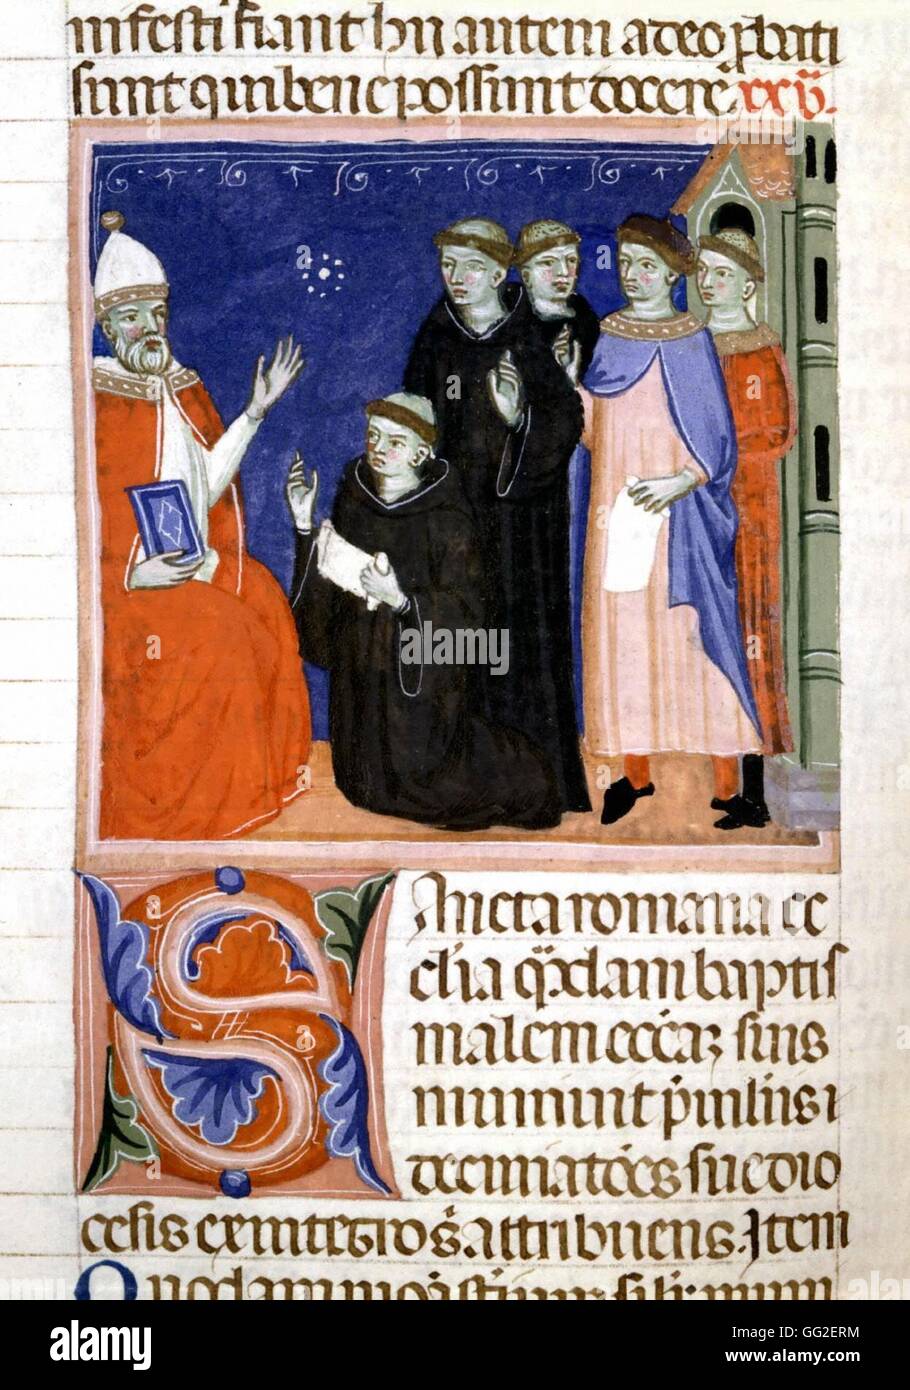 Decree of Graziano, 12th-century Bolognese monk: mendicant friars presenting a a petition to the pope. The decree long served as the basis for school teaching. 14th C Italy Paris. Sorbonne Library Stock Photo